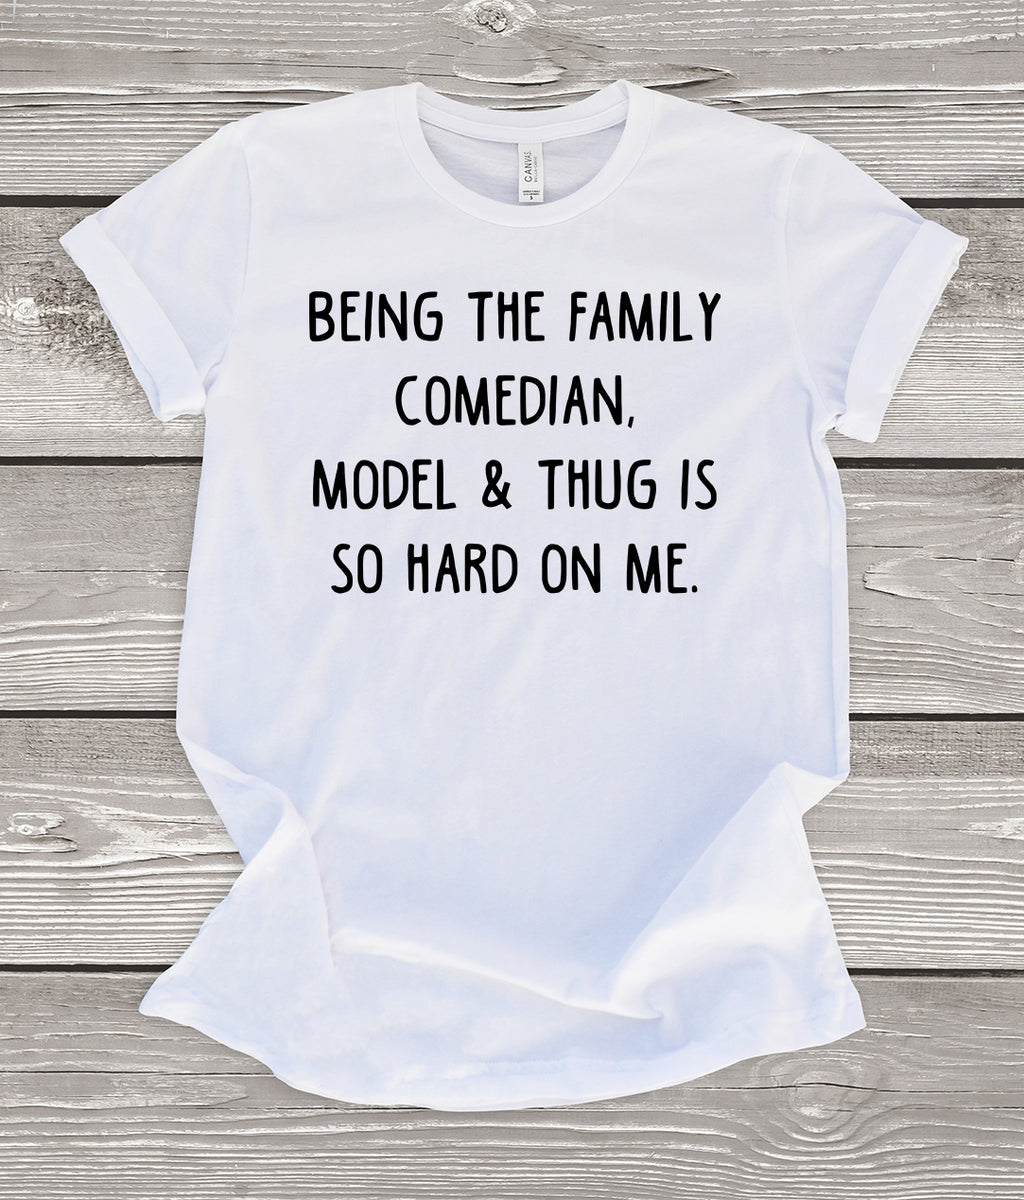 Being the Family Comedian, Model, & Thug is so Hard on Me White T-Shirt